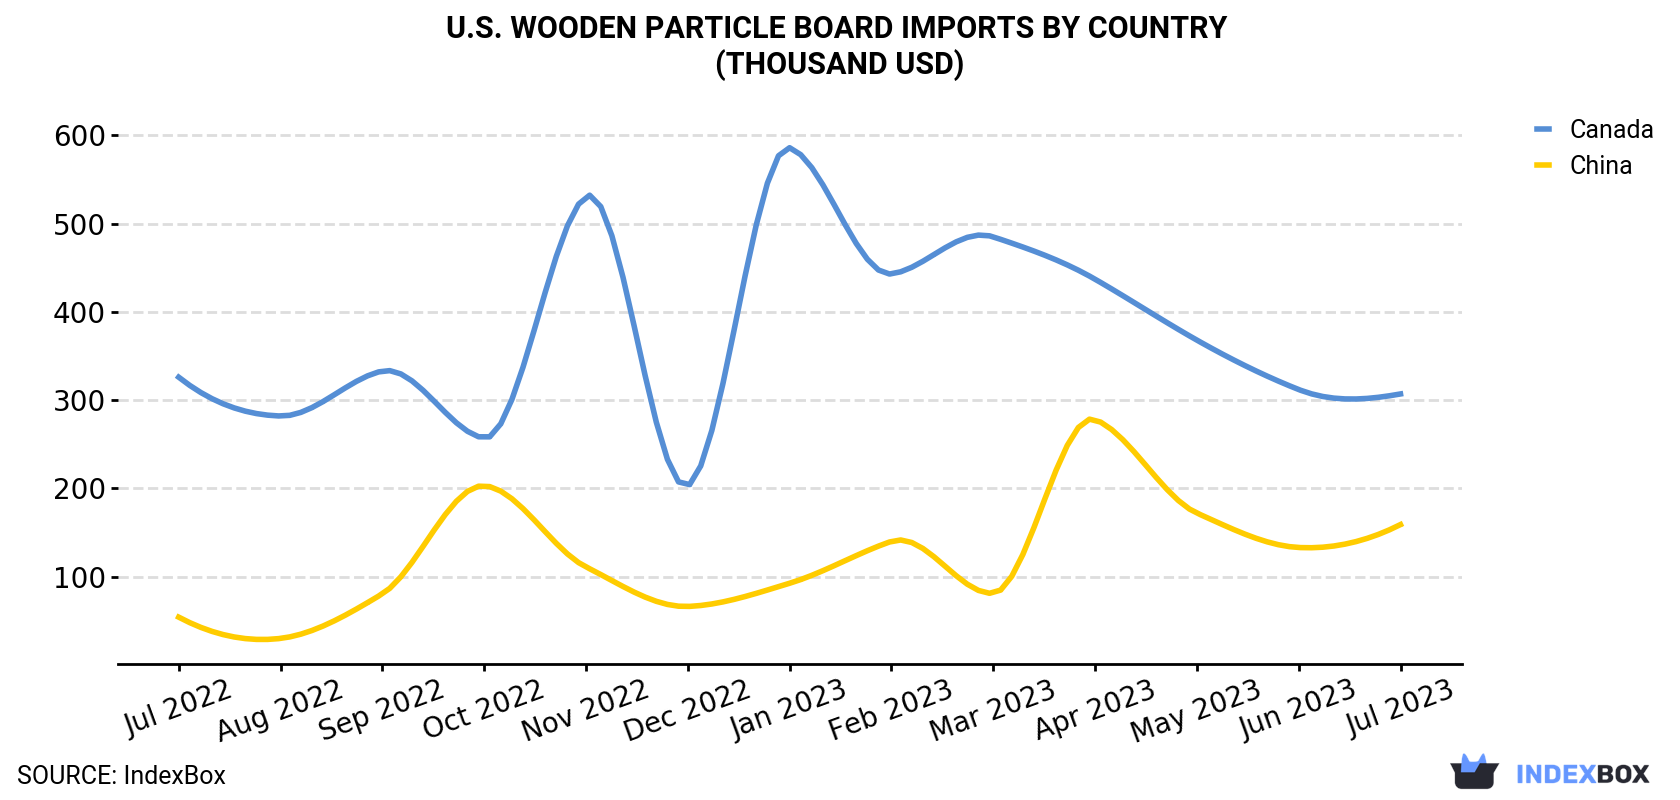 U.S. Wooden Particle Board Imports By Country (Thousand USD)